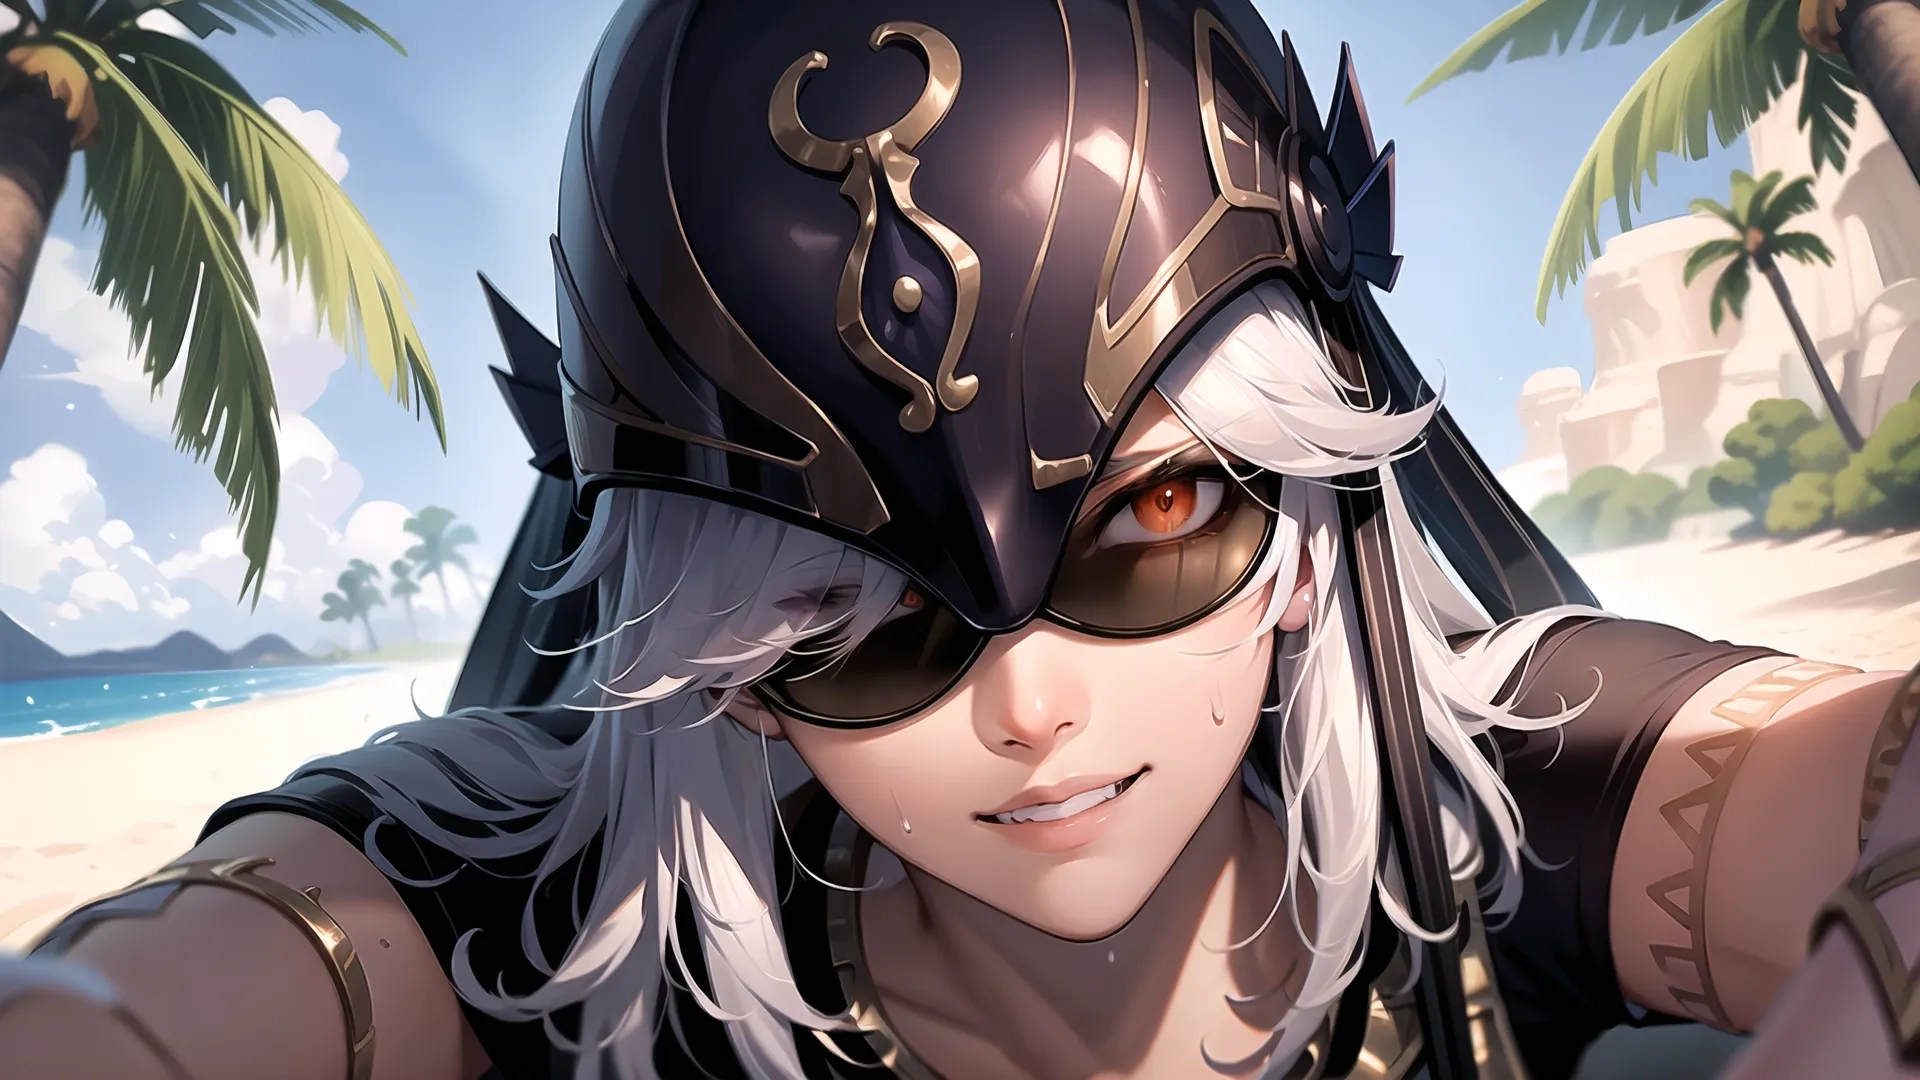 a woman with sunglasses on standing next to palm trees and the beach on sunny, clear day looks forward while wearing an oversized eye armor style helmet
